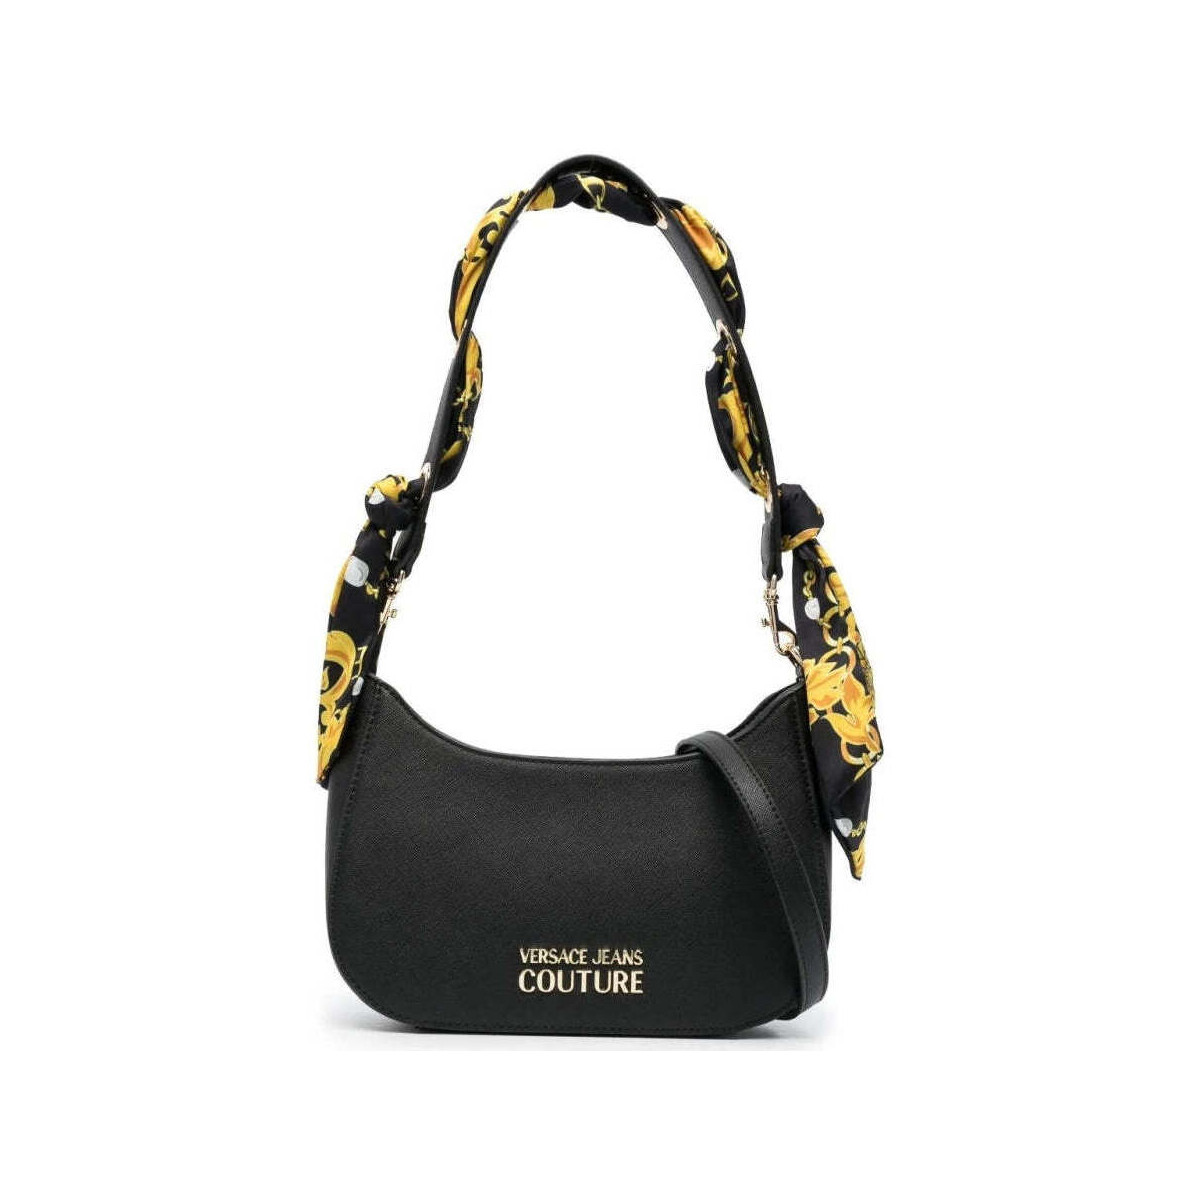 Versace Jeans Couture Noir thelma classic hobo bag SI6g